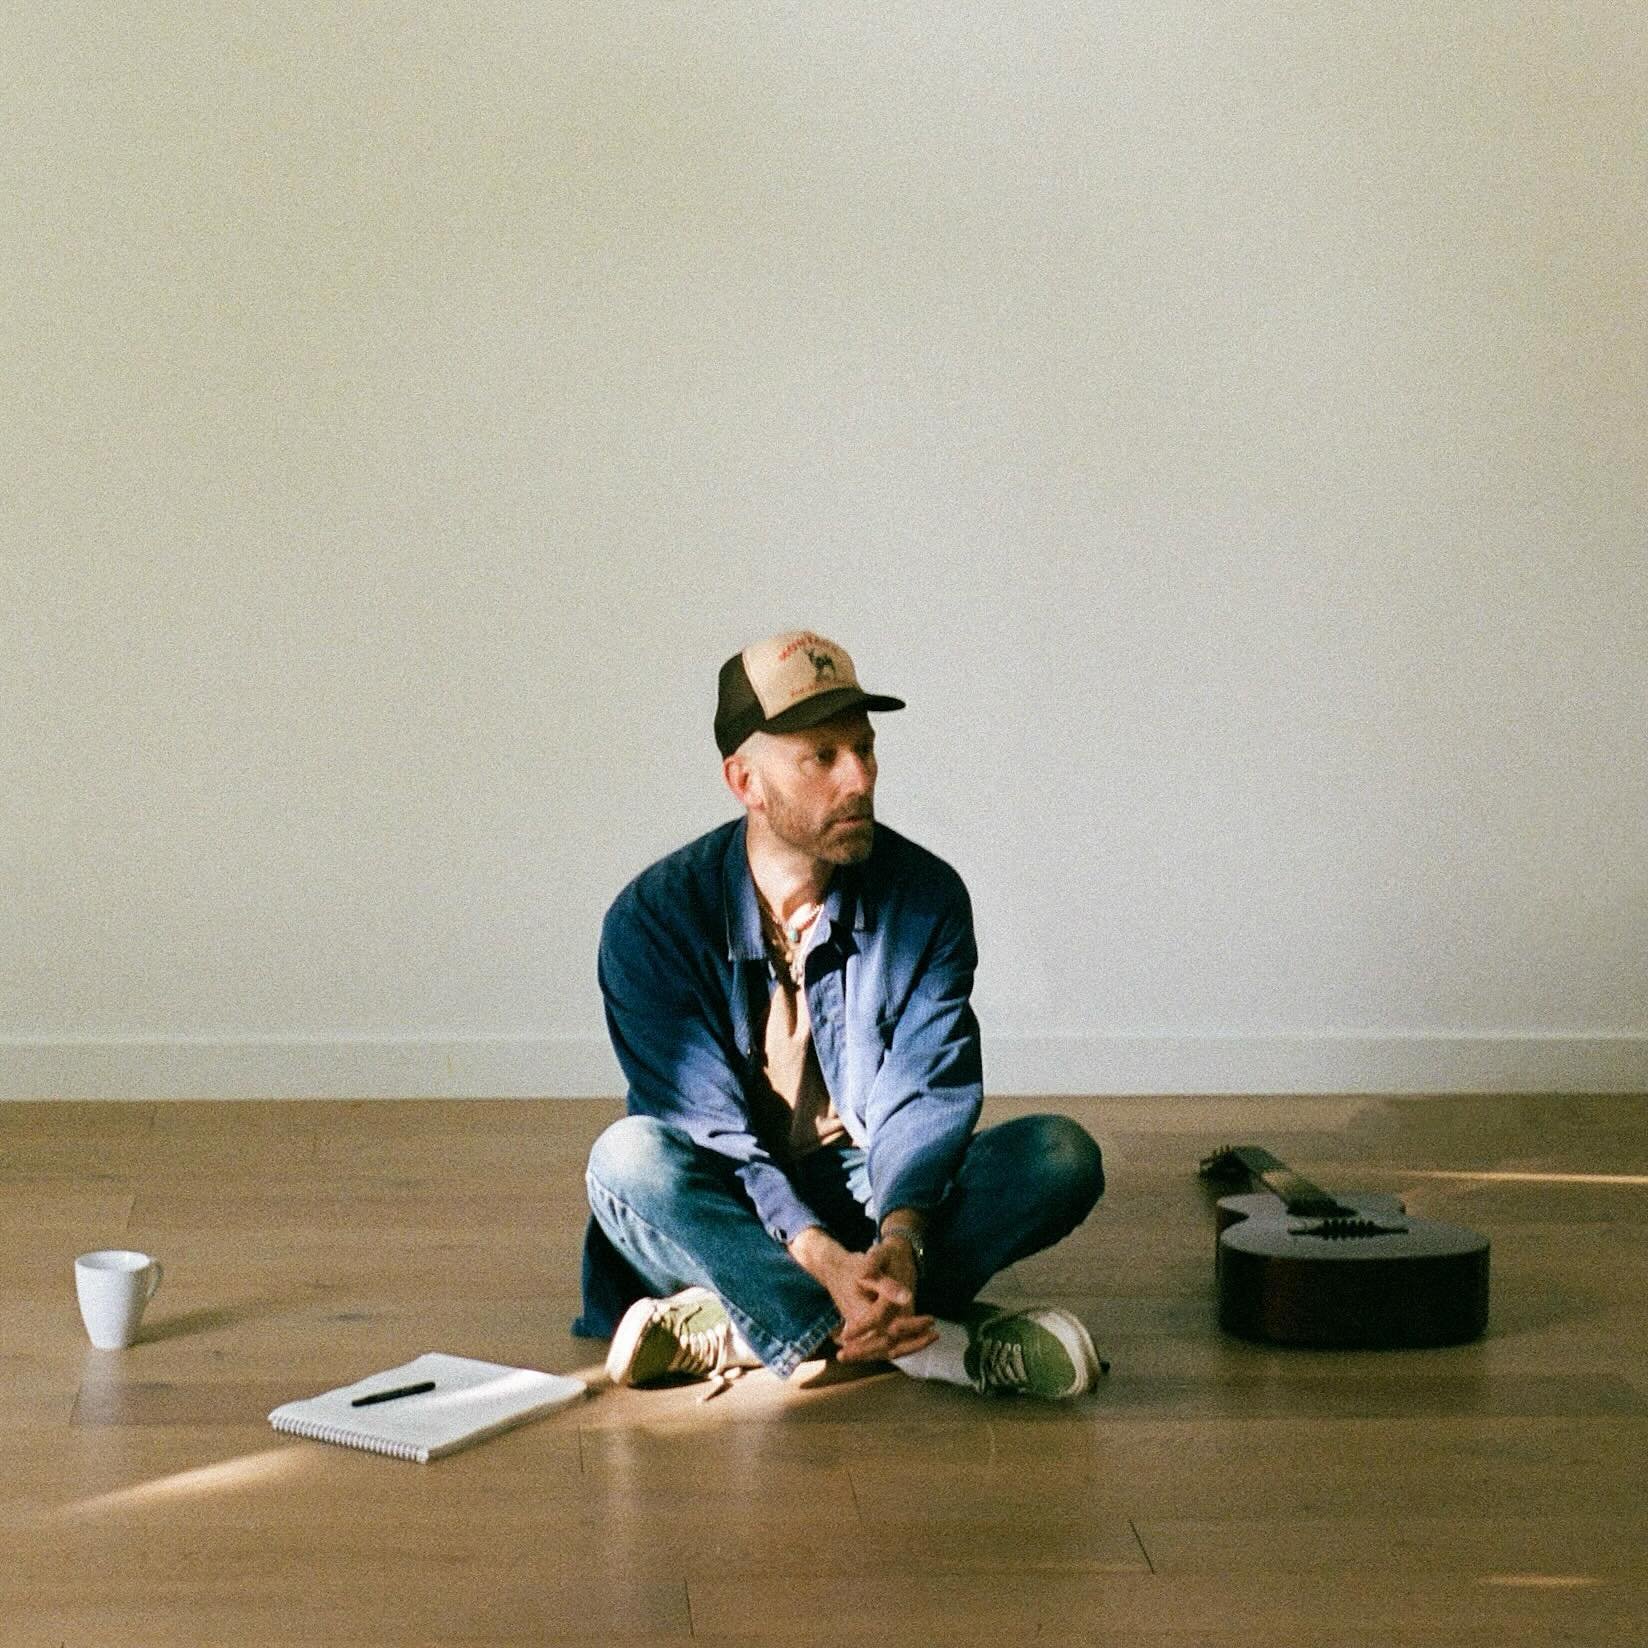 Last Friday, @matkearney released his melancholy new track &ldquo;Drowning in Nostalgia.&rdquo; This is the fifth single from his forthcoming self-titled album, which will be released on May 15th. 

Listen to &ldquo;Drowning in Nostalgia&rdquo; and p